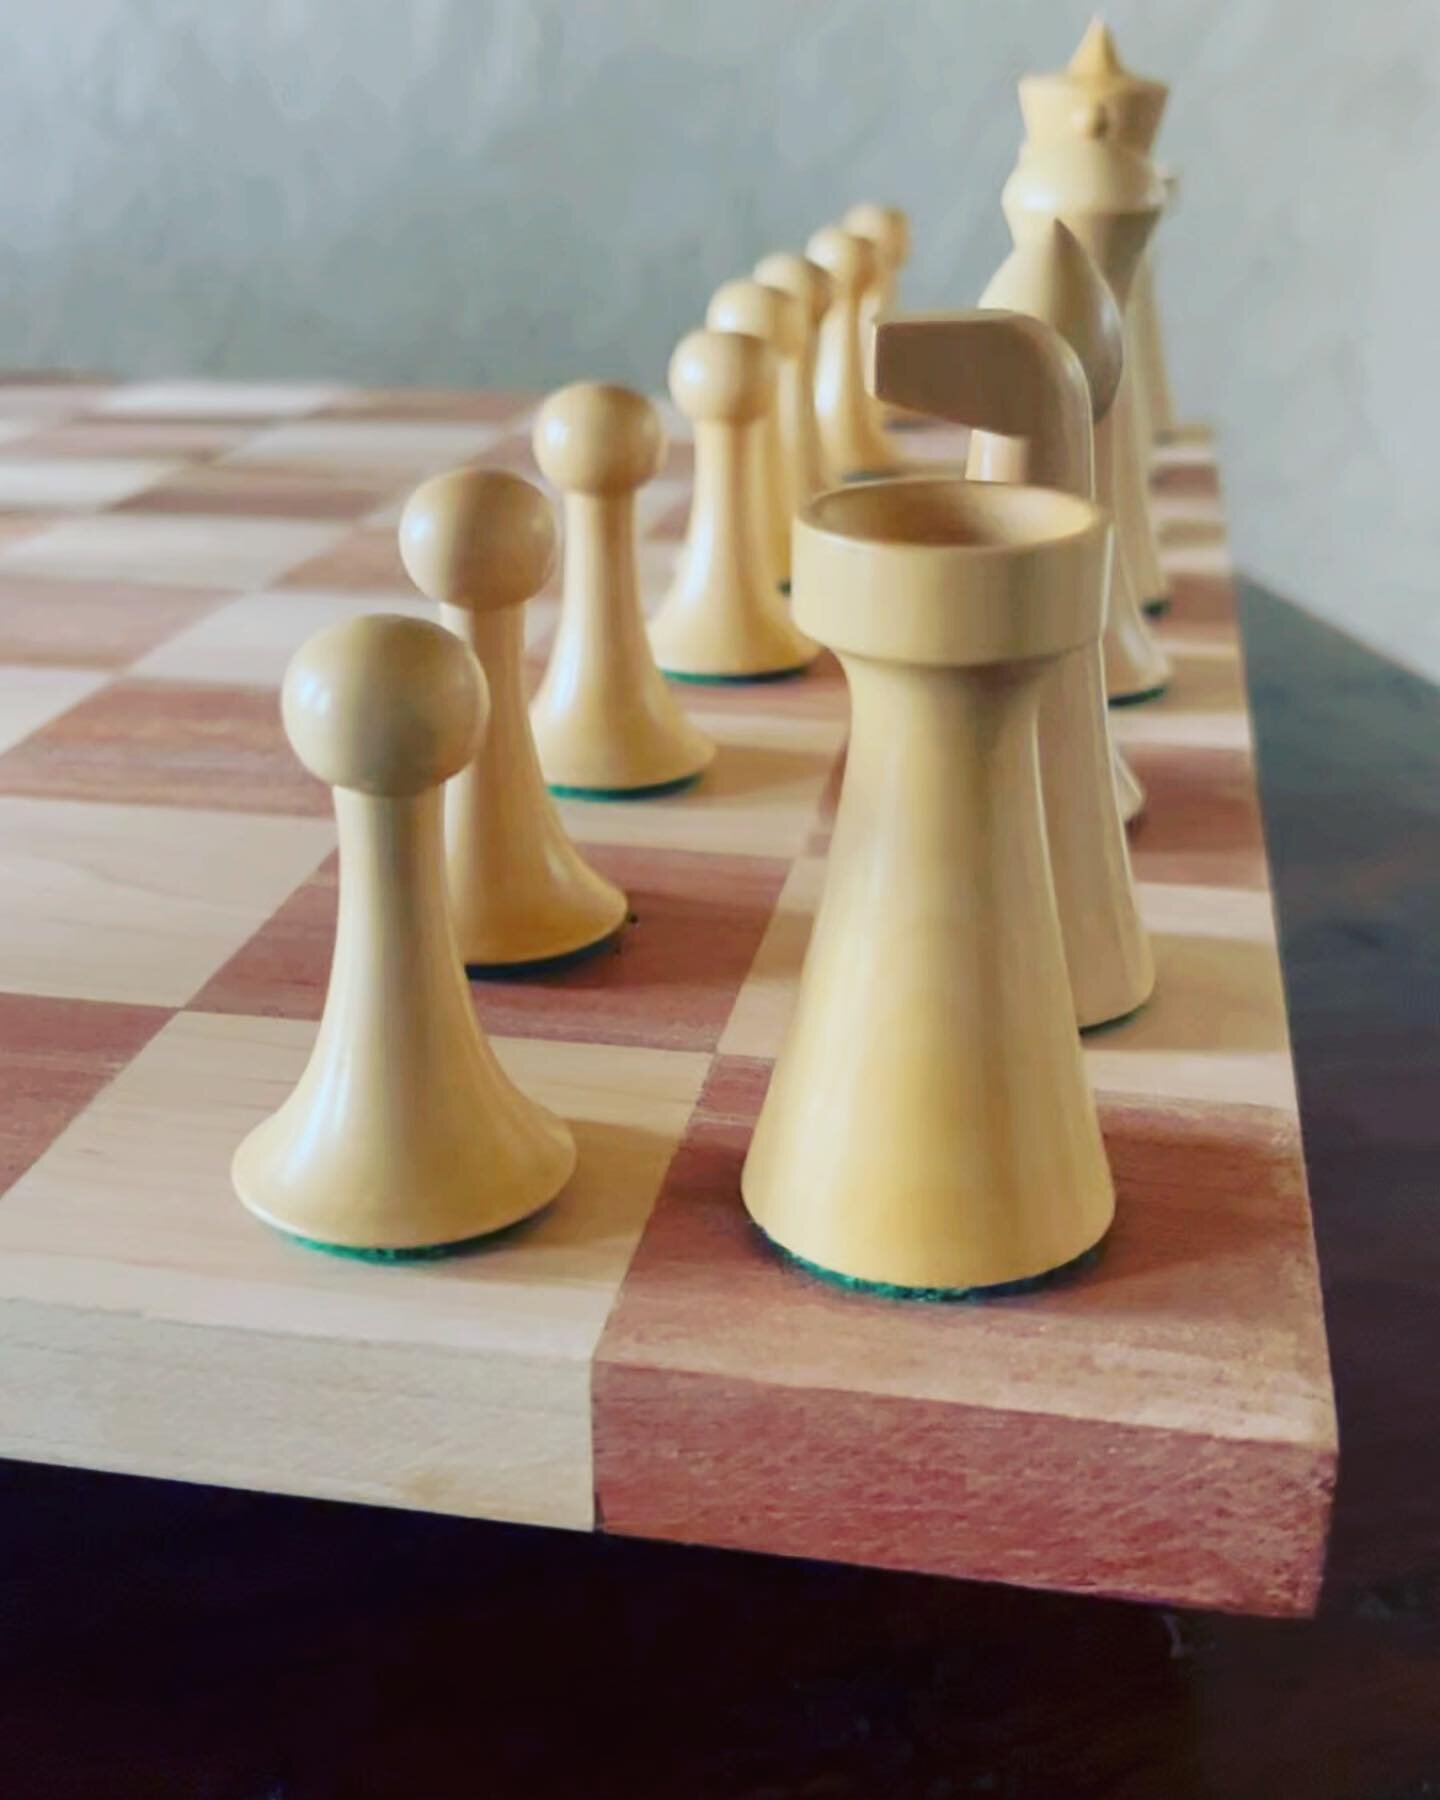 Herman Ohme chess pieces from Black Forest Studio. Hand carved. And they love the Catalan. ♟️
.
#chess #catalan #chesslife  #magnuscarlsen #♟️ #chessopenings #chessboard #chessset #customchess #customchessboard #customchessset #customchesspieces #che